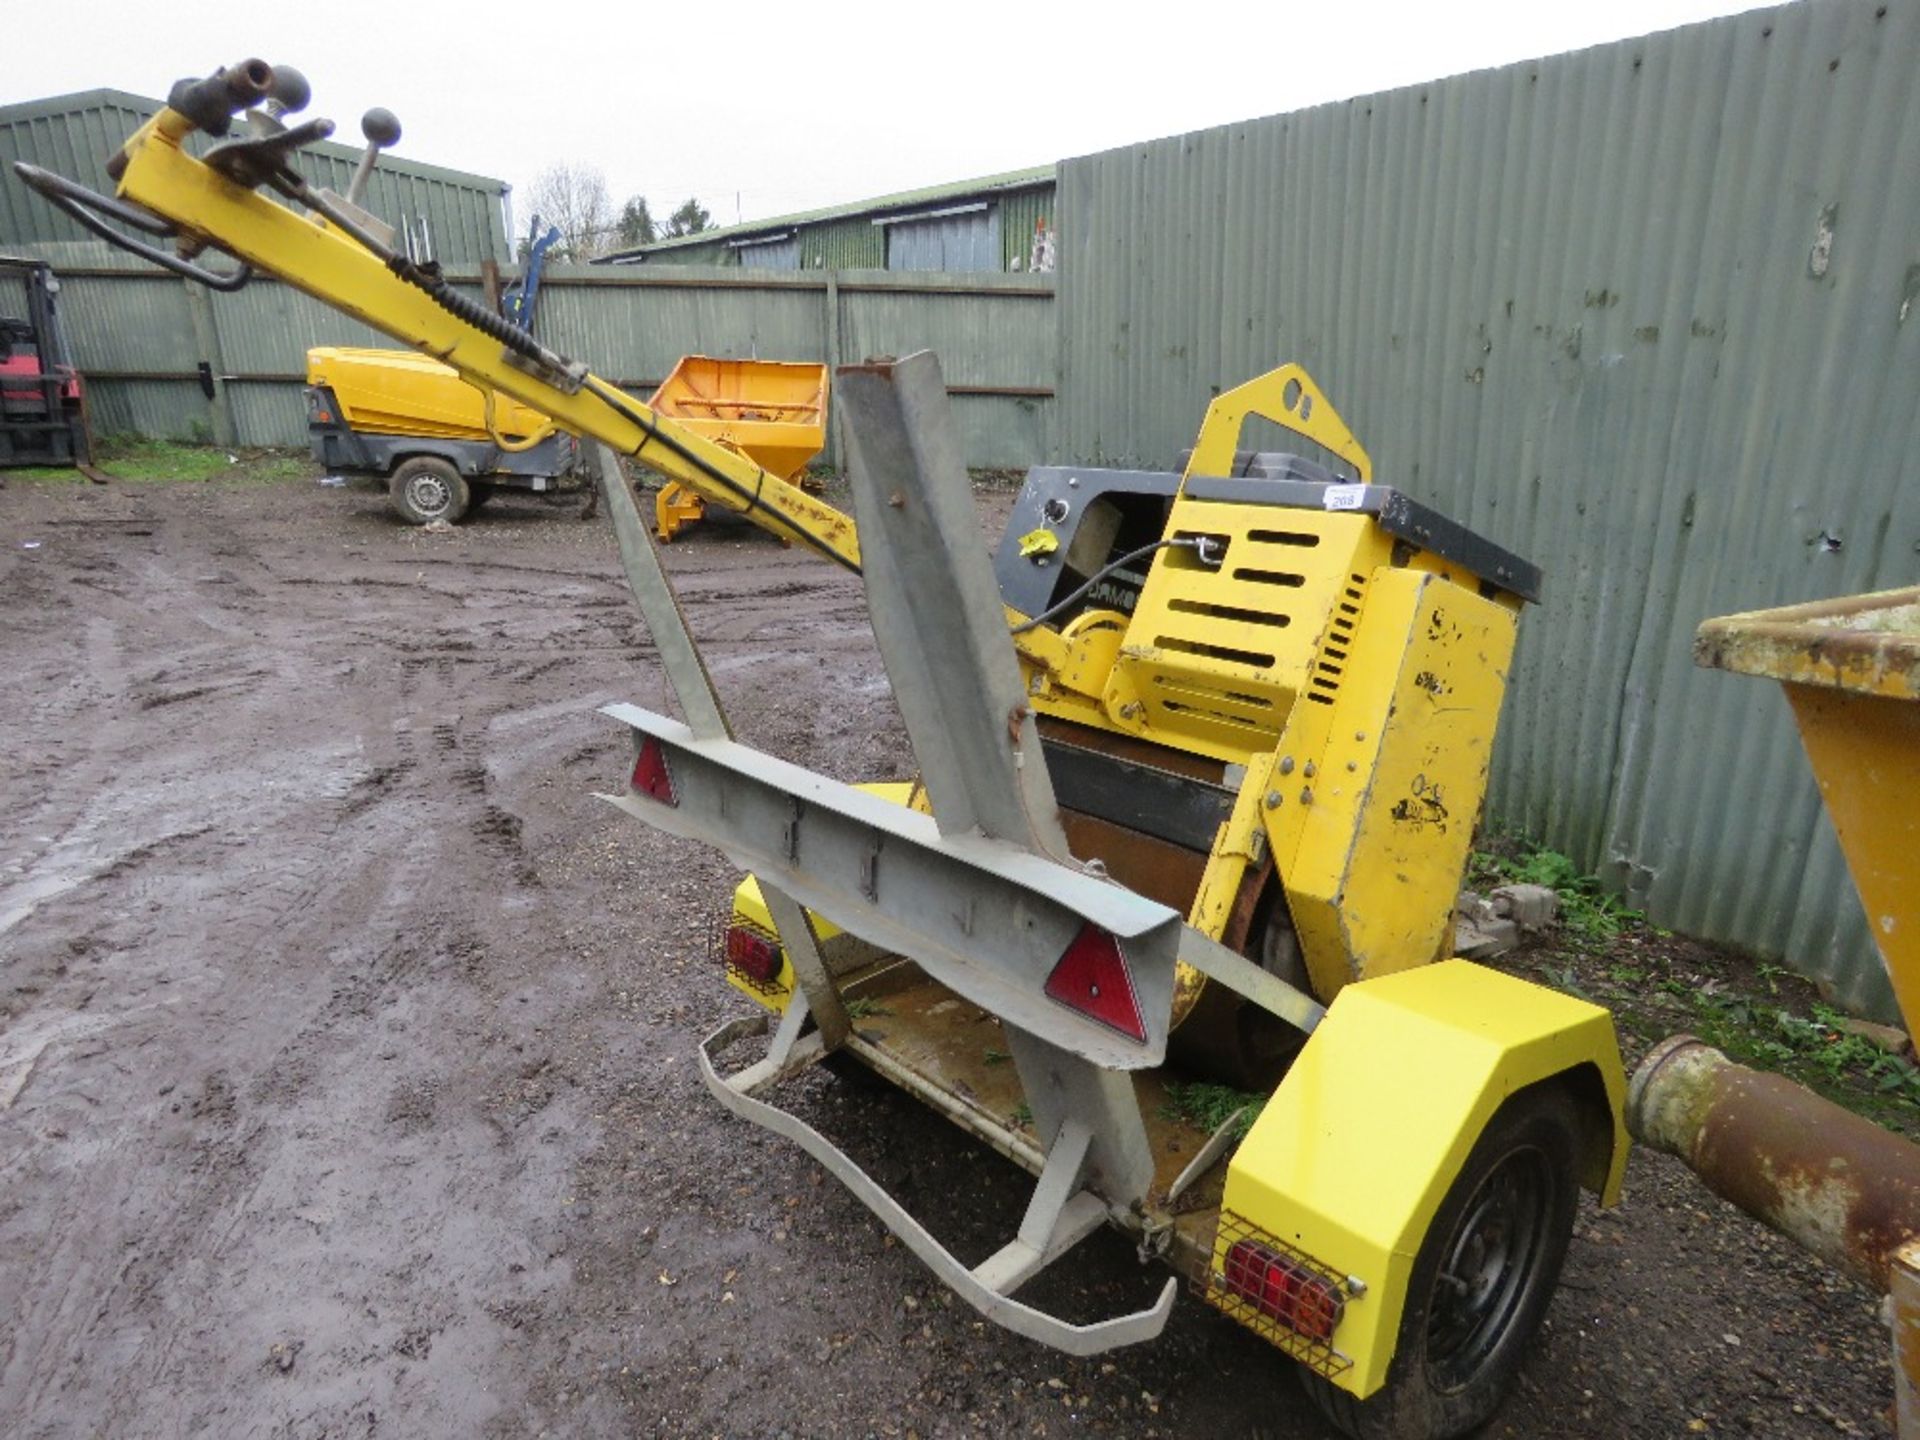 BOMAG BW71E-2 SINGLE DRUM ROLLER ON A TRAILER YEAR 2017 BUILD. SN: 101620291368. SOURCED FROM LARGE